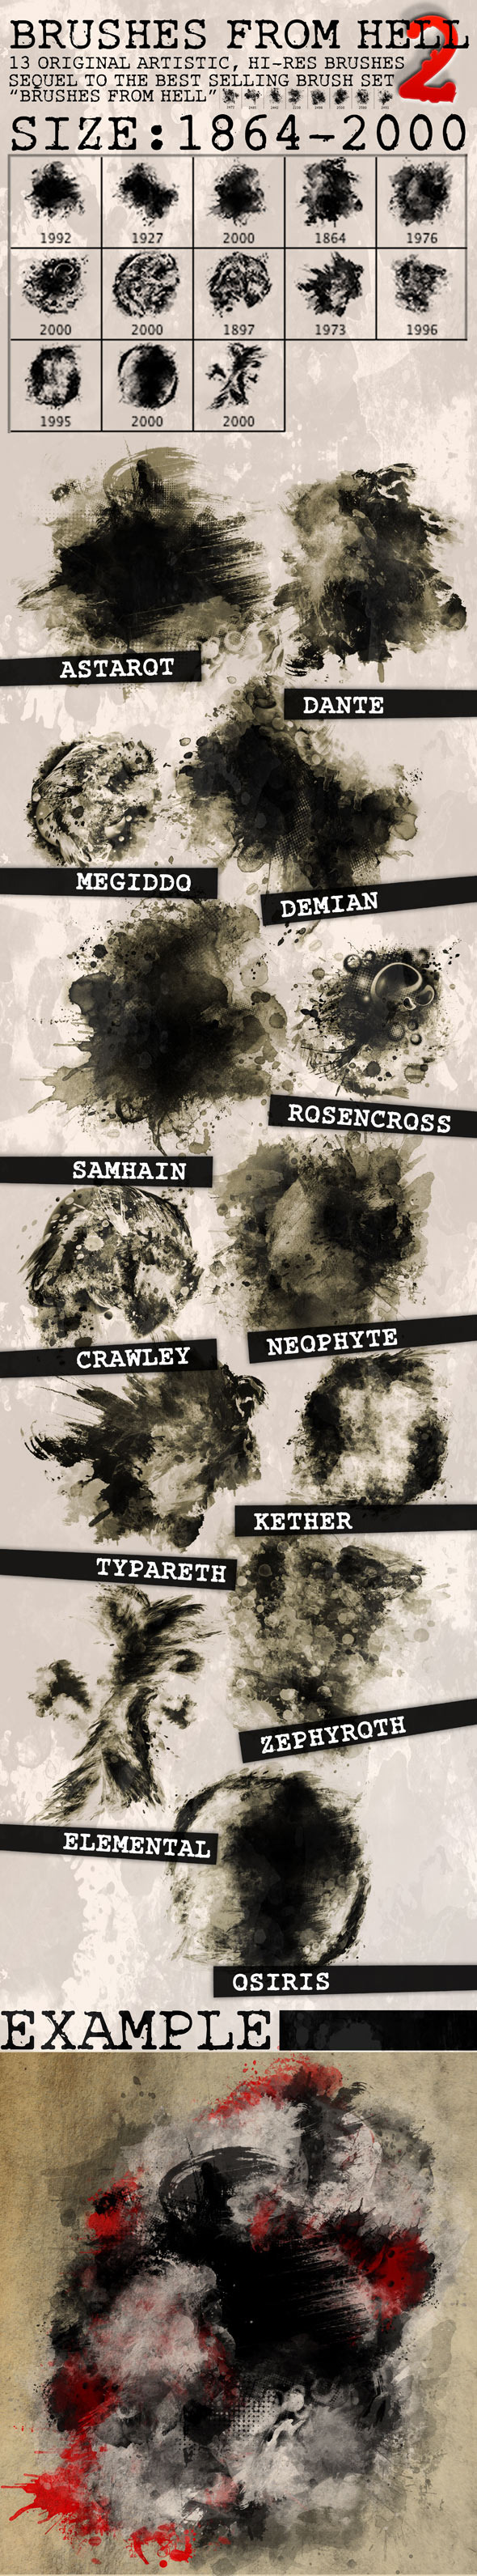 13 Hi-Res Brushes from Hell 2